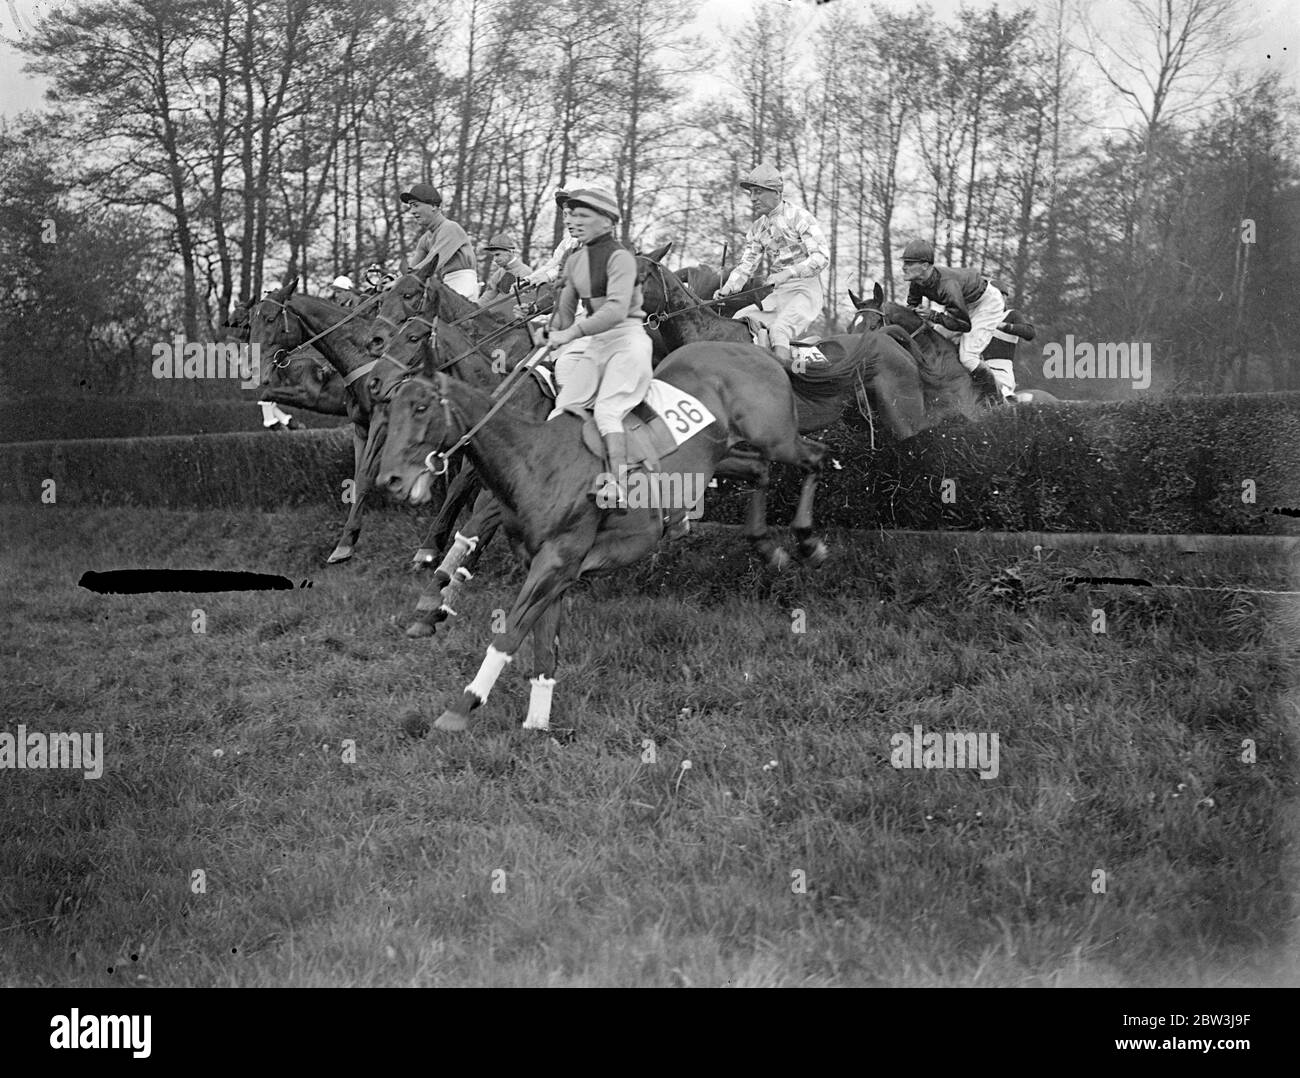 Seven over together at Lingfield . Bon Cheval wins . Bon Cheval won ' The Gone Away Open Hunters Chase Cup when the United Hunts Steeplechases were run at Lingfield . the White King was second and Golden Ore third . Photo shows , seven horses taking a jump in The Gone Away OpenHunters Chase Cup , won by the Bon Cheval . 11 May 1936 Stock Photo